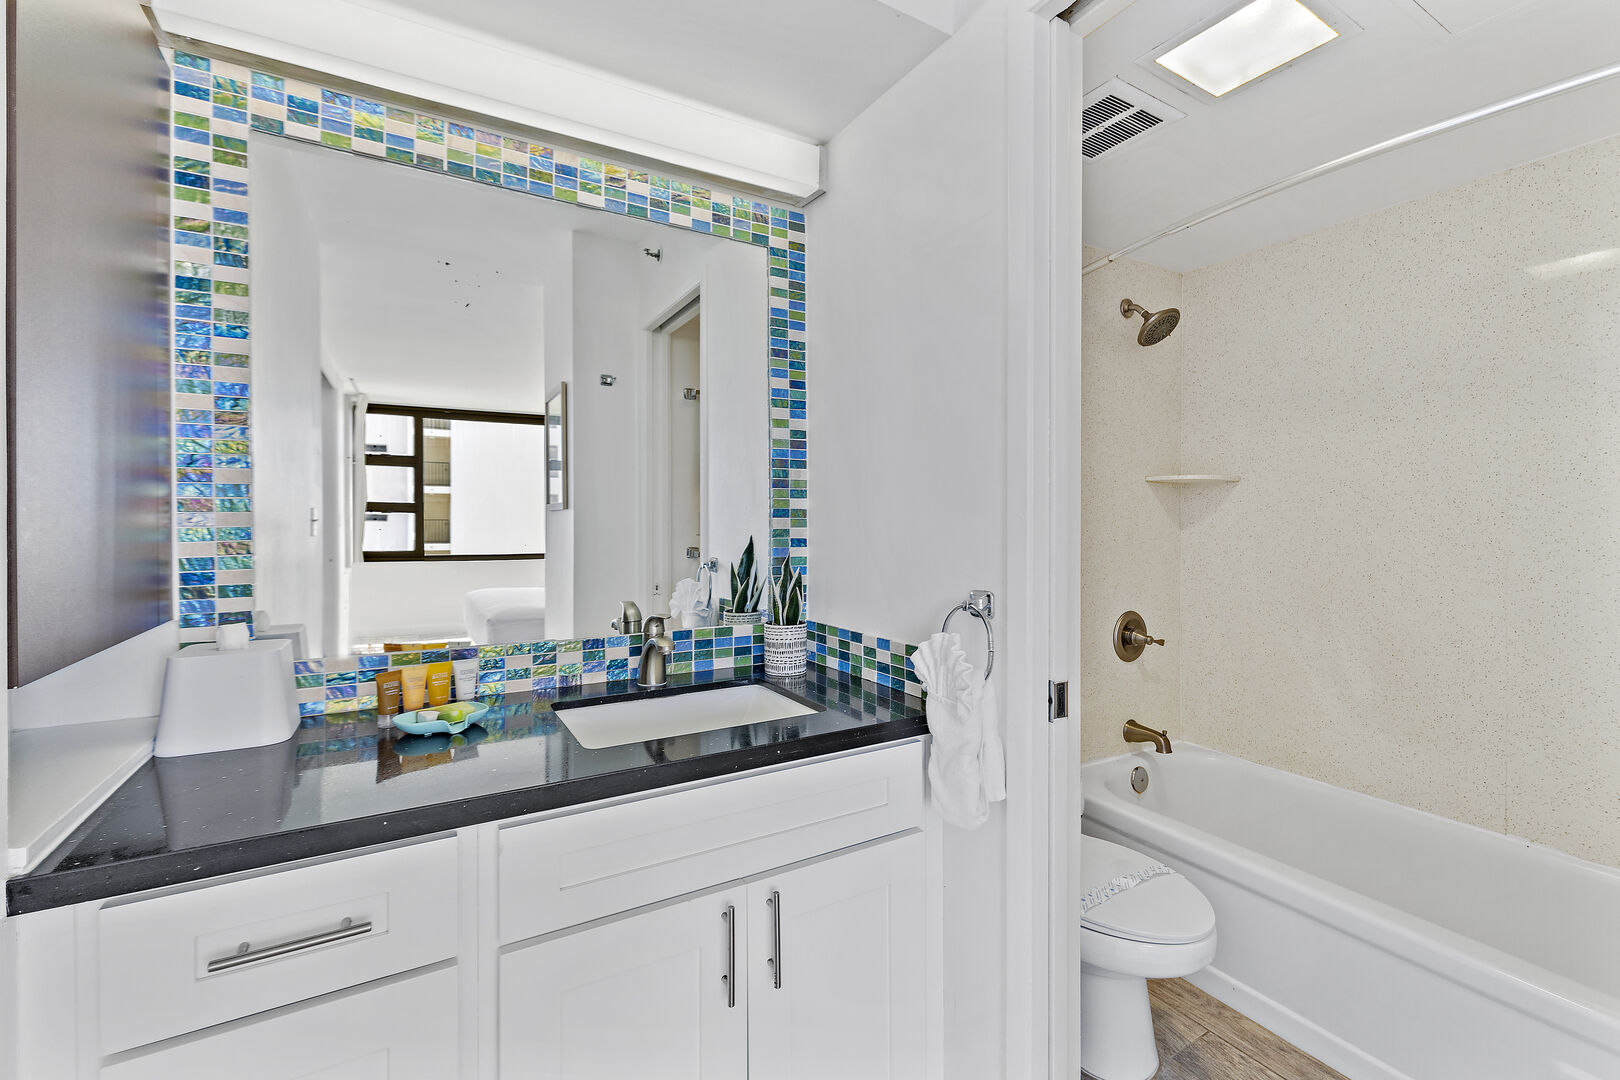 Refresh in your full bathroom with shower and tub combination!